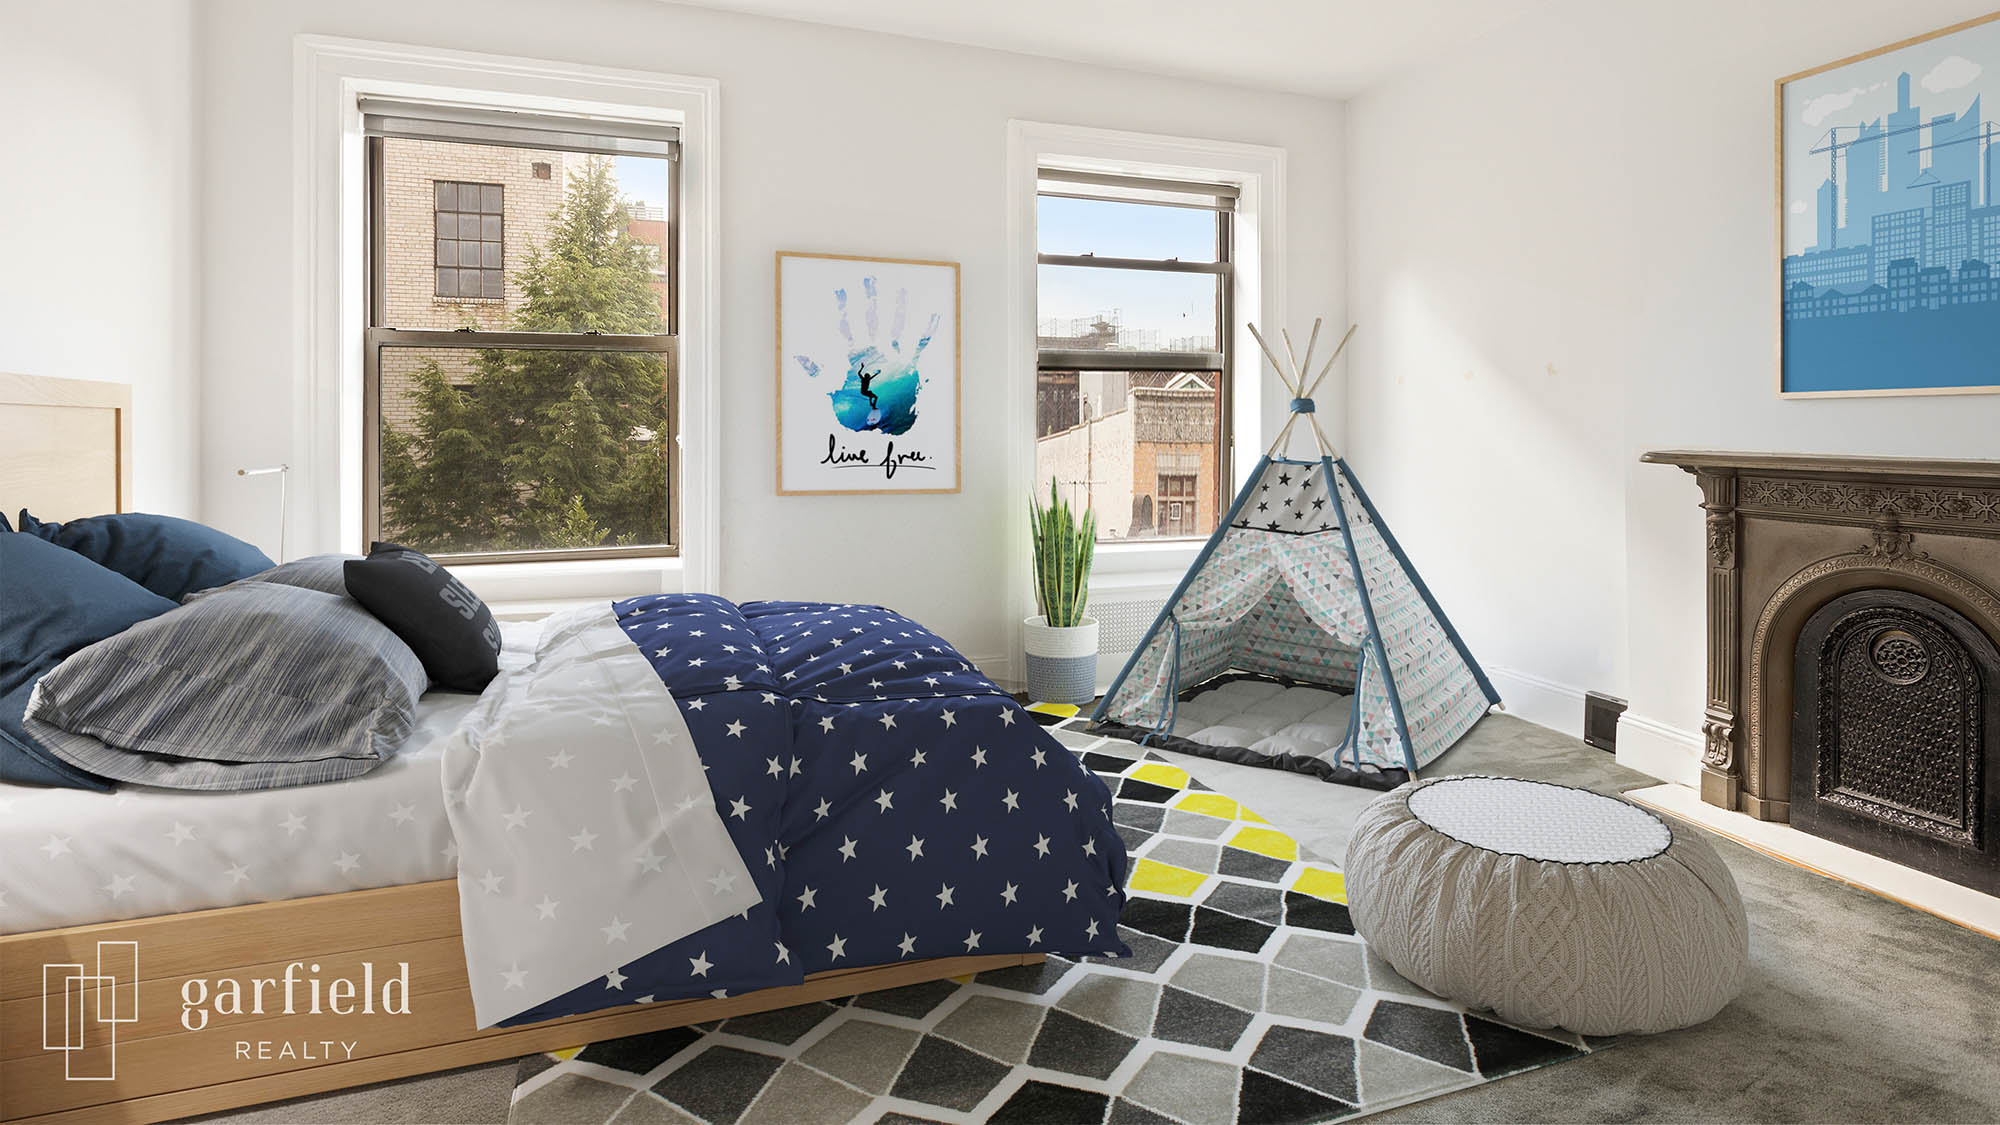 Virtually staged kids bedroom with blue and white polka dot comforter blue pillows on geometric throw rug next to bean bag chair and teepee tent in front of fireplace with blue artwork hanging above and to the left a handprint painting flanked by two windows